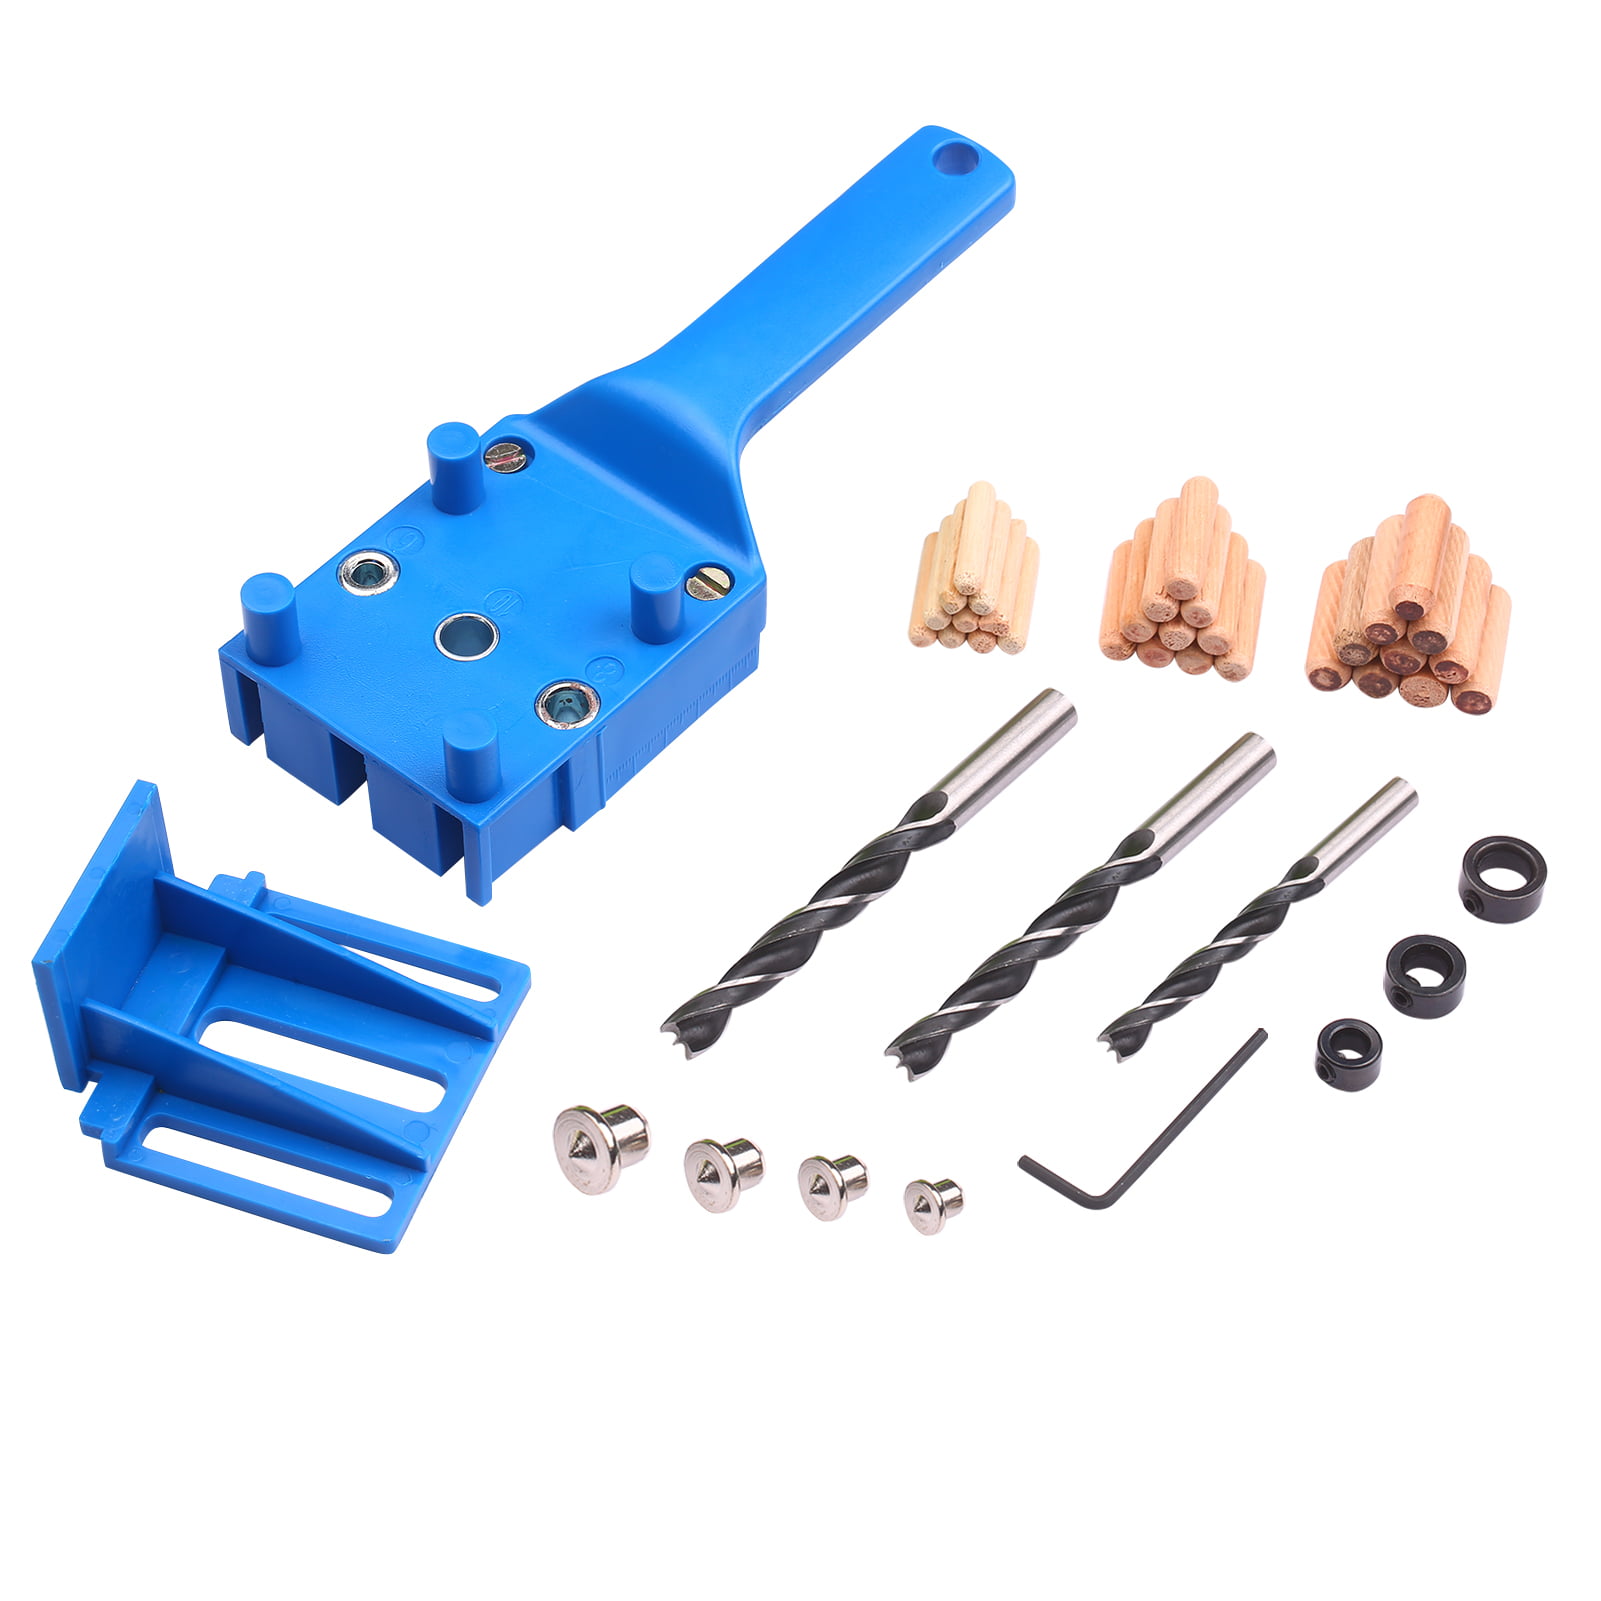 dowel hole drilling positioner Straight hole punch for woodworking carpentry tool for straight hole with measuring scale 